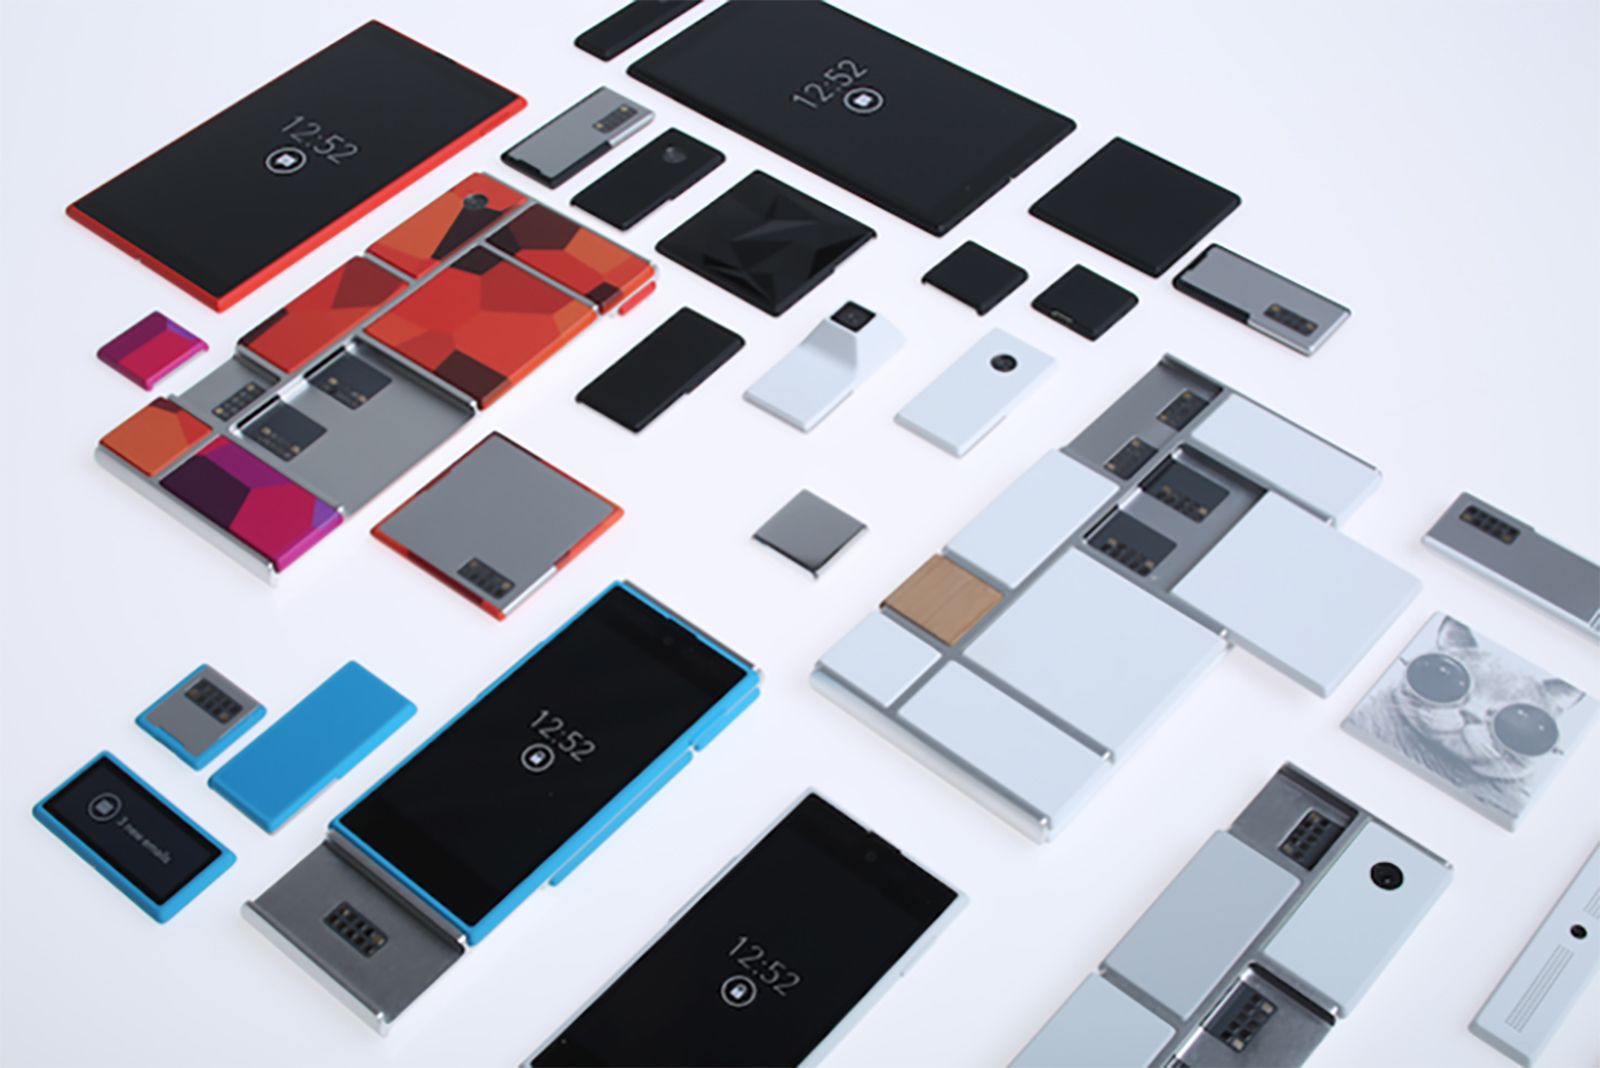 google to sell project ara smartphone modules through online store image 1